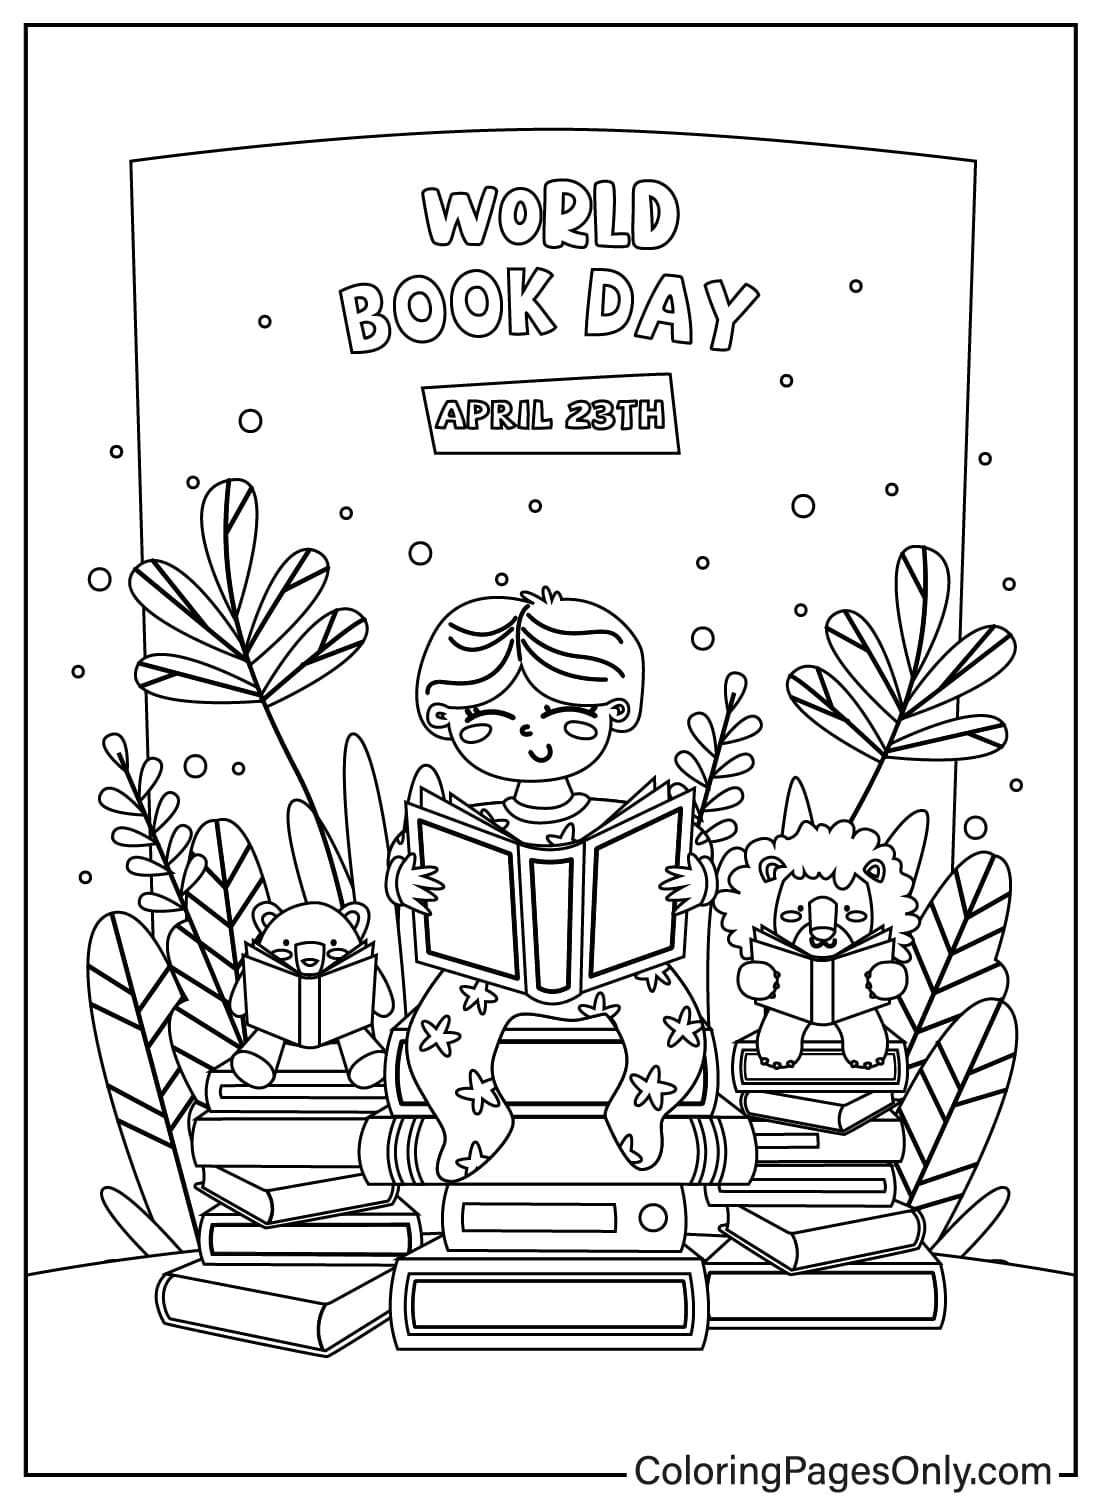 World Book Day Coloring Pages to Download from World Book Day